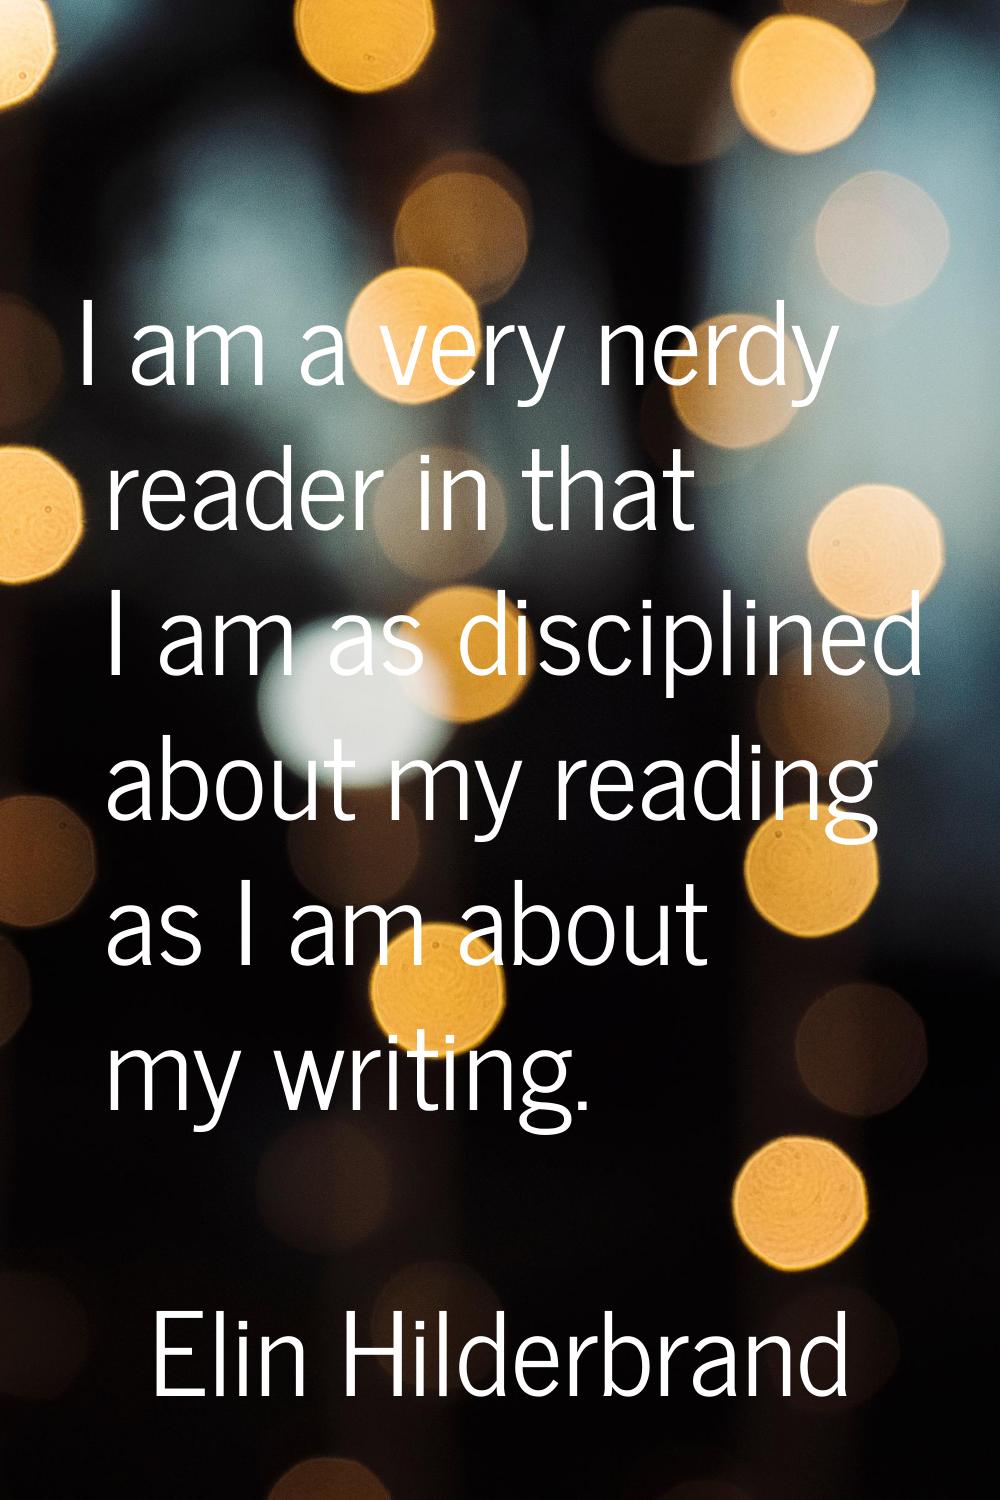 I am a very nerdy reader in that I am as disciplined about my reading as I am about my writing.